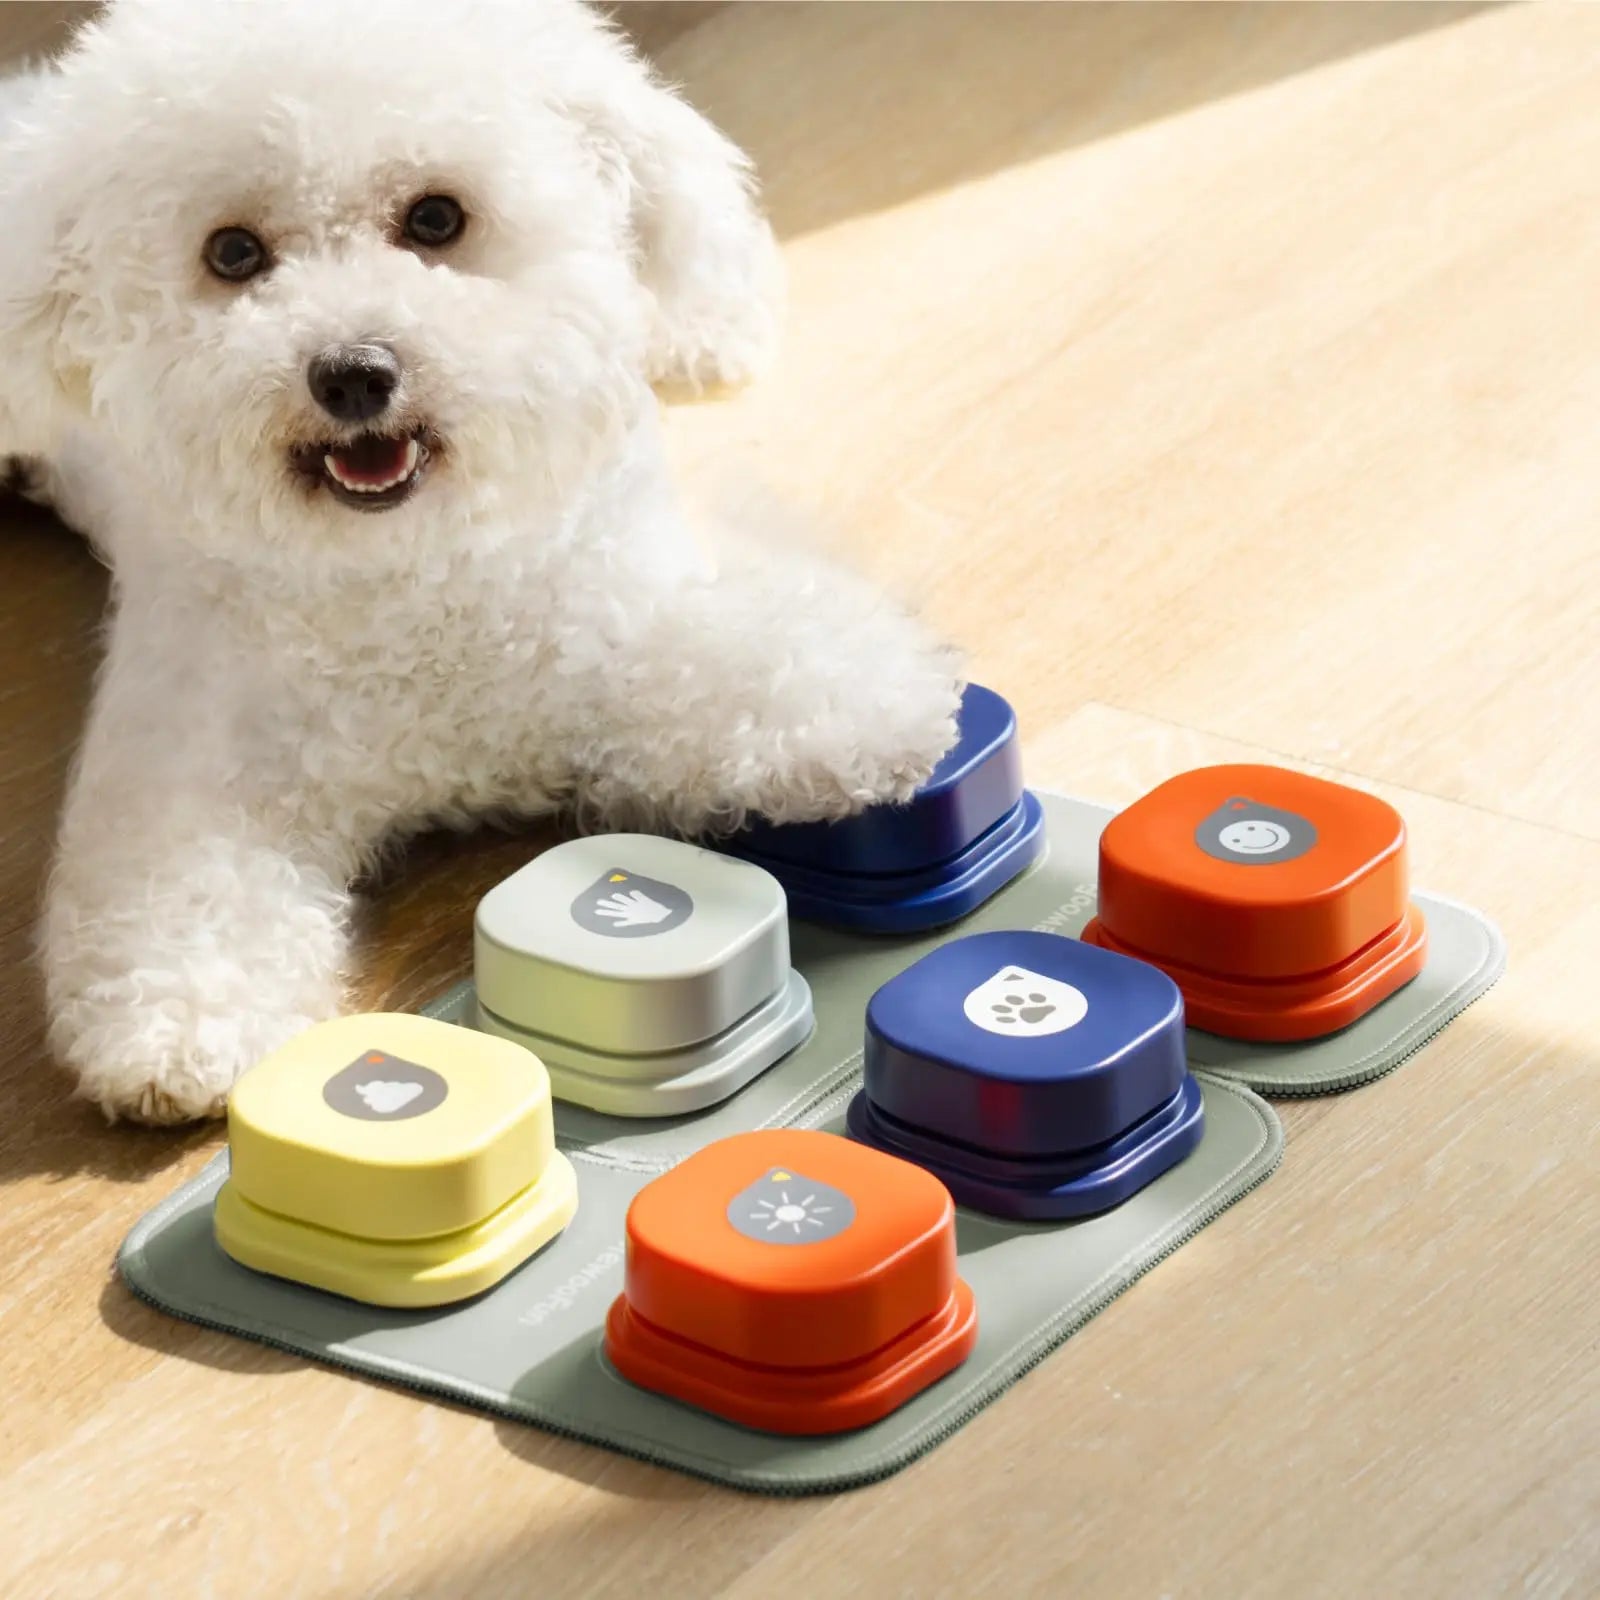 PET COMMUNICATION BELL TOY